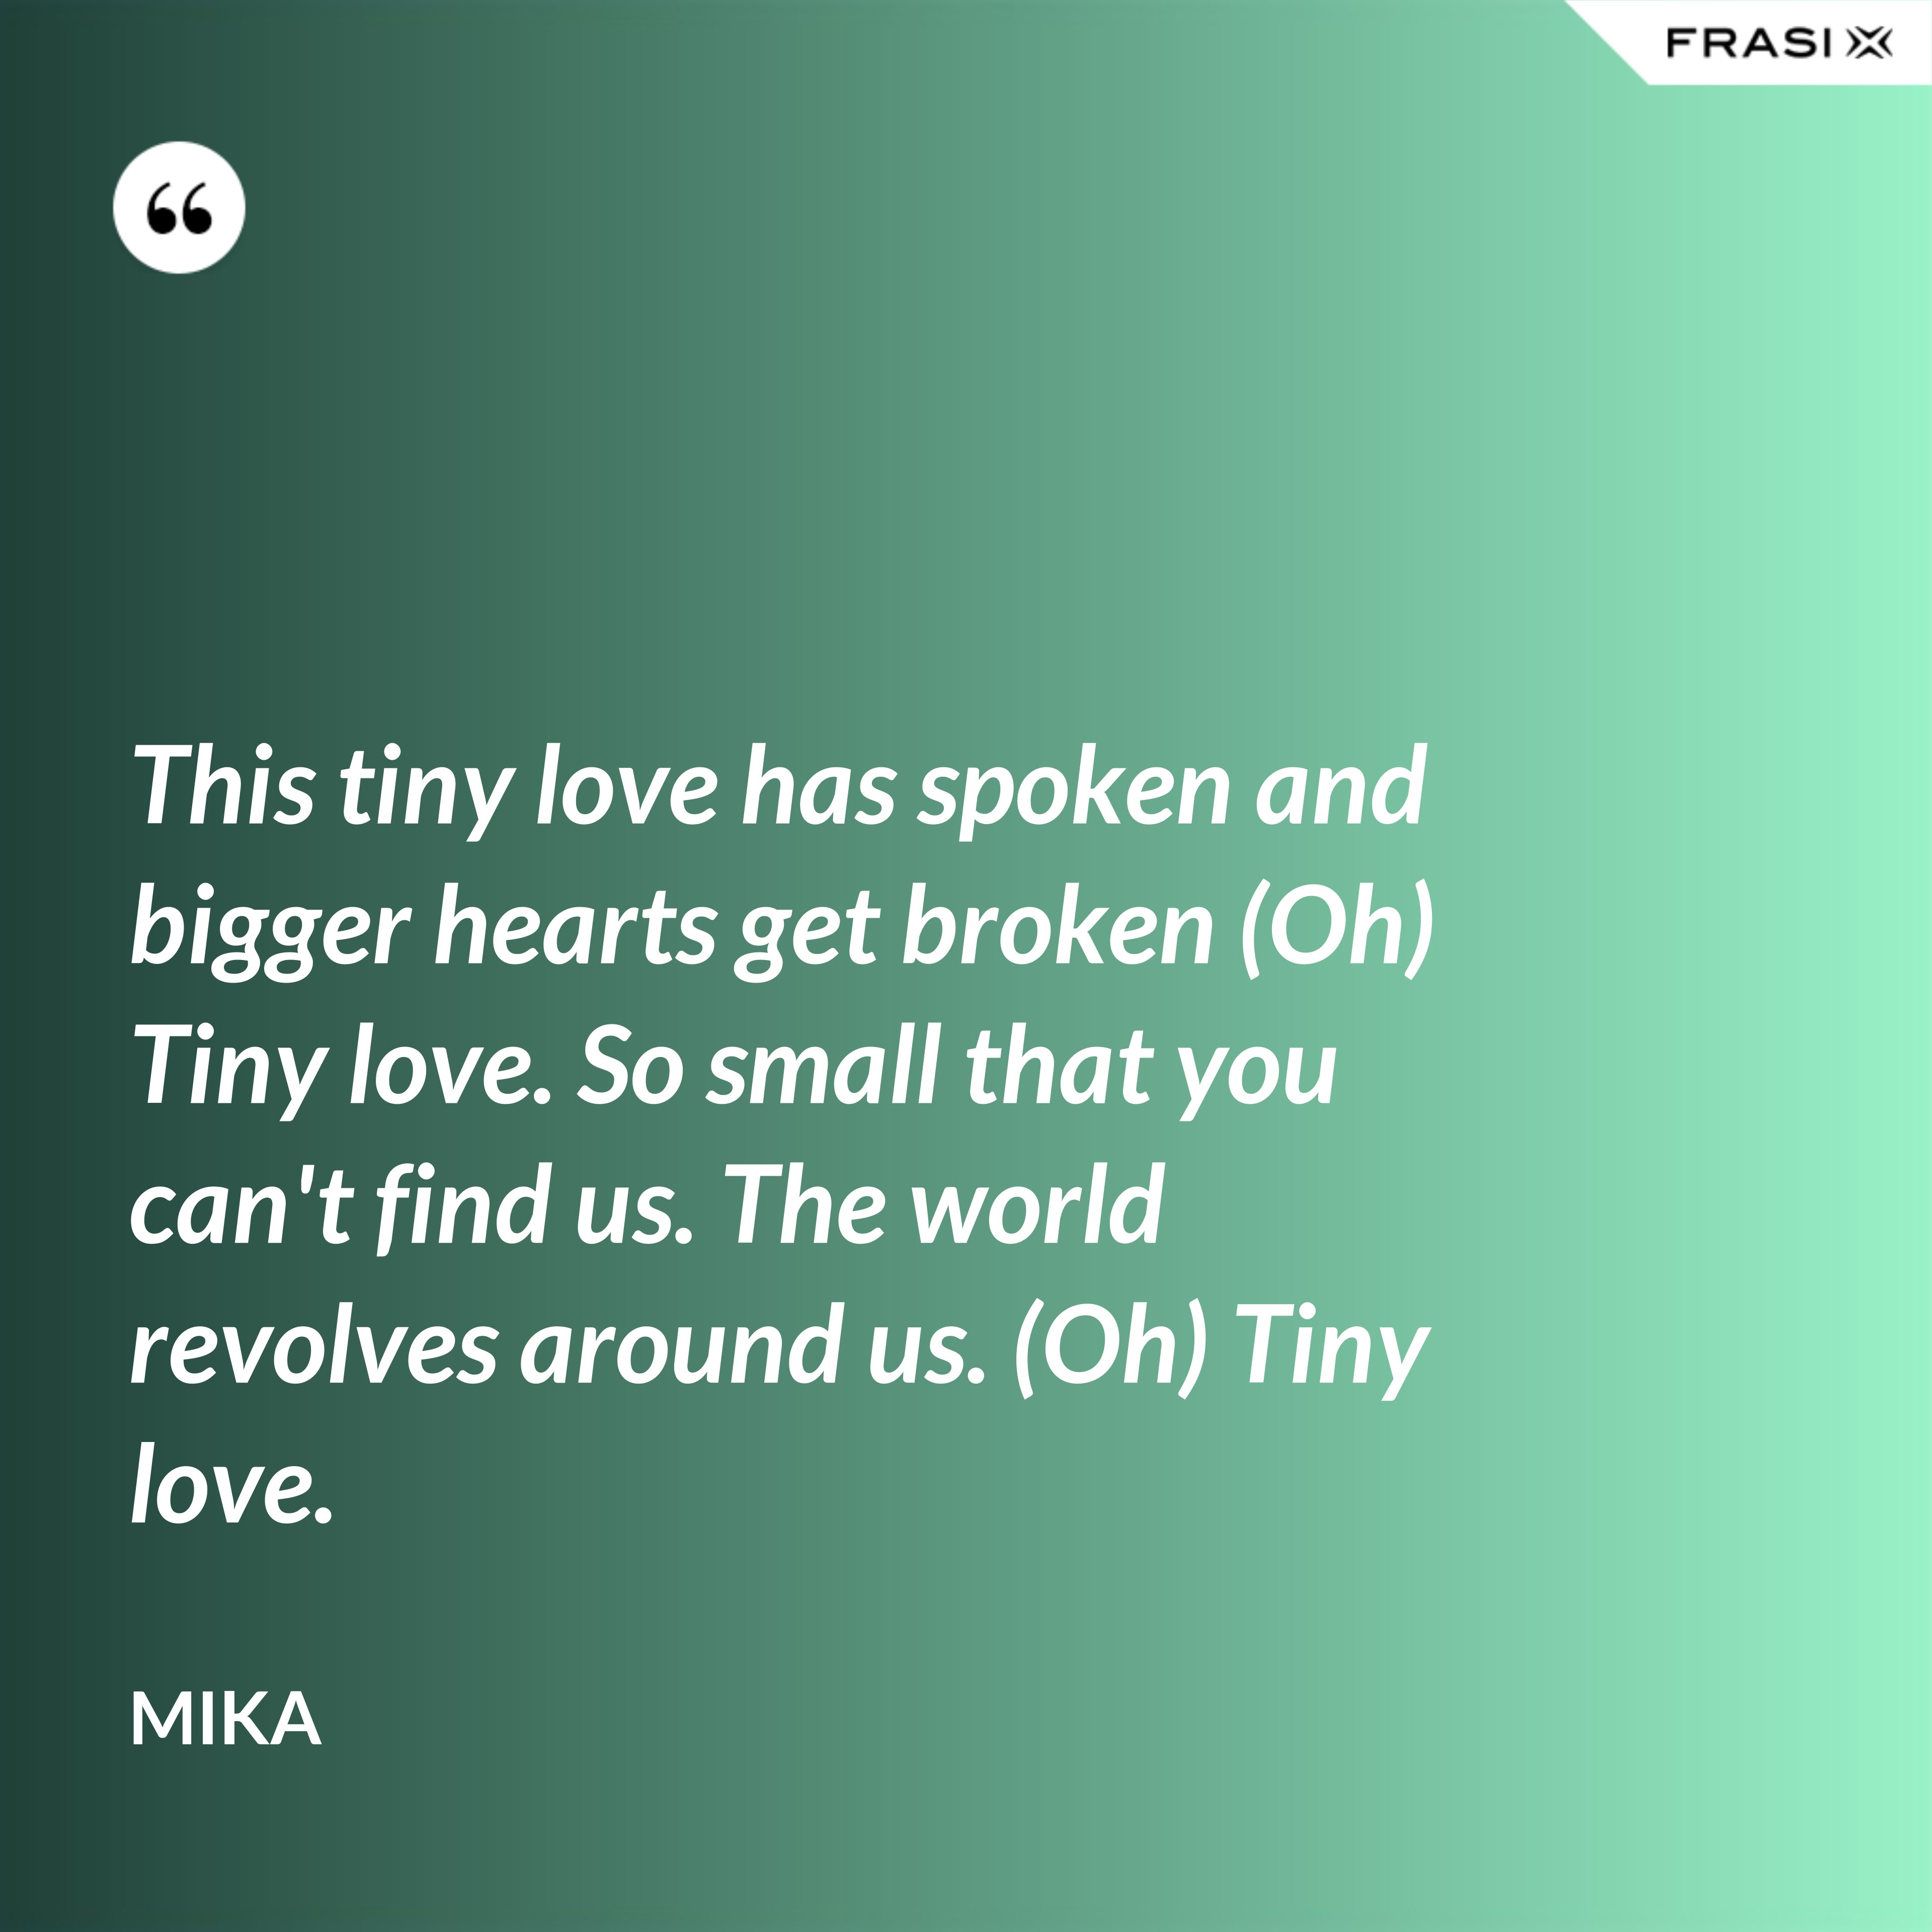 This tiny love has spoken and bigger hearts get broken (Oh) Tiny love. So small that you can't find us. The world revolves around us. (Oh) Tiny love. - Mika